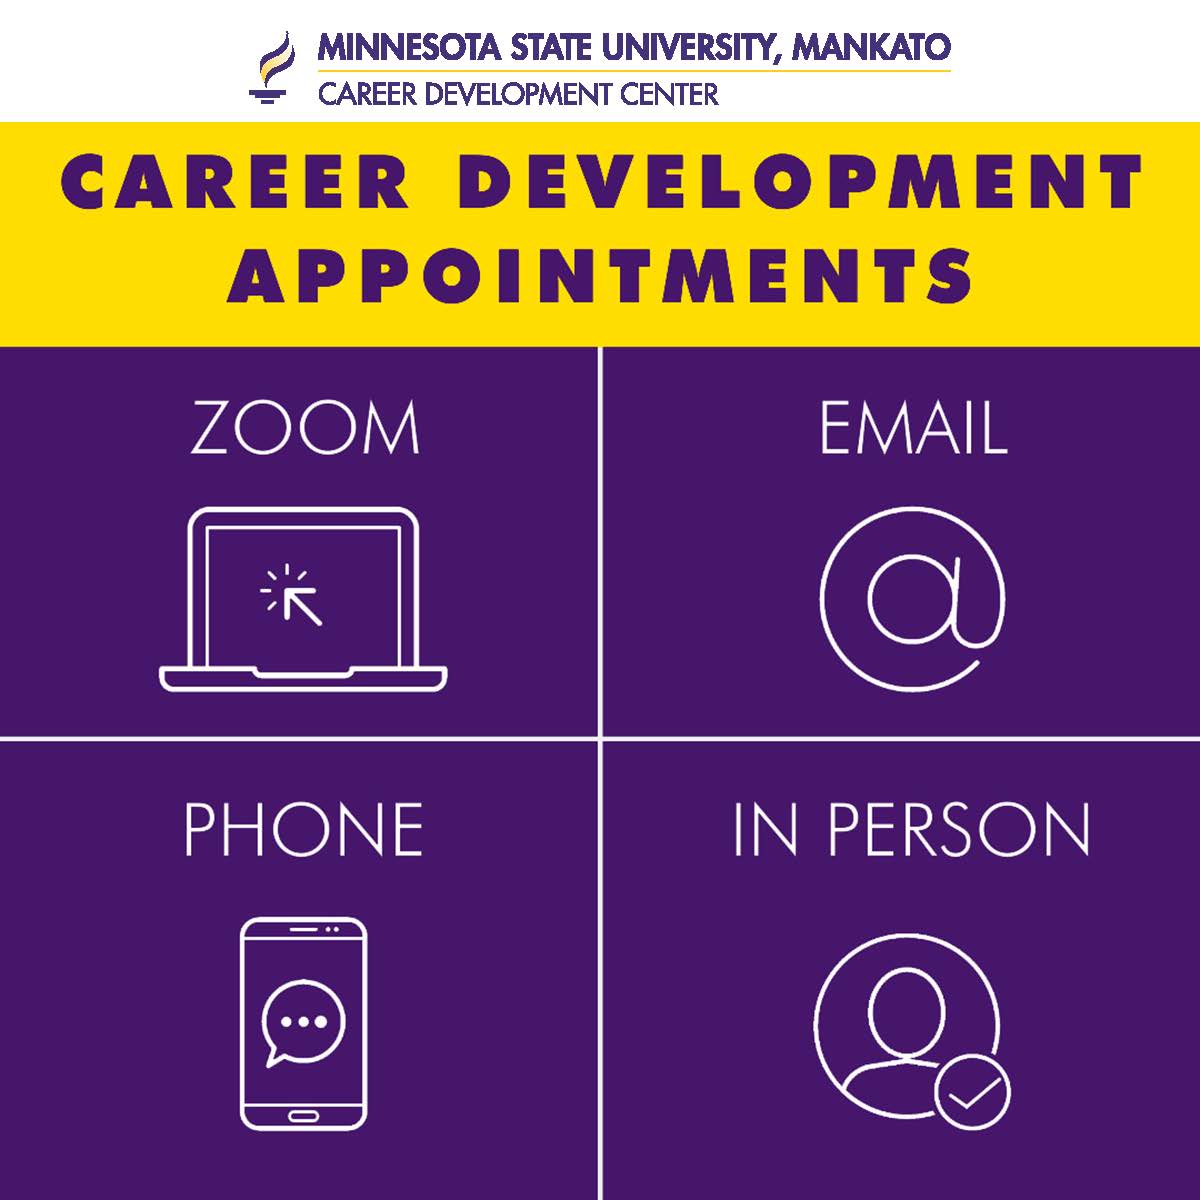 Appointment Request 4x4 card (2)_Page_1.jpg